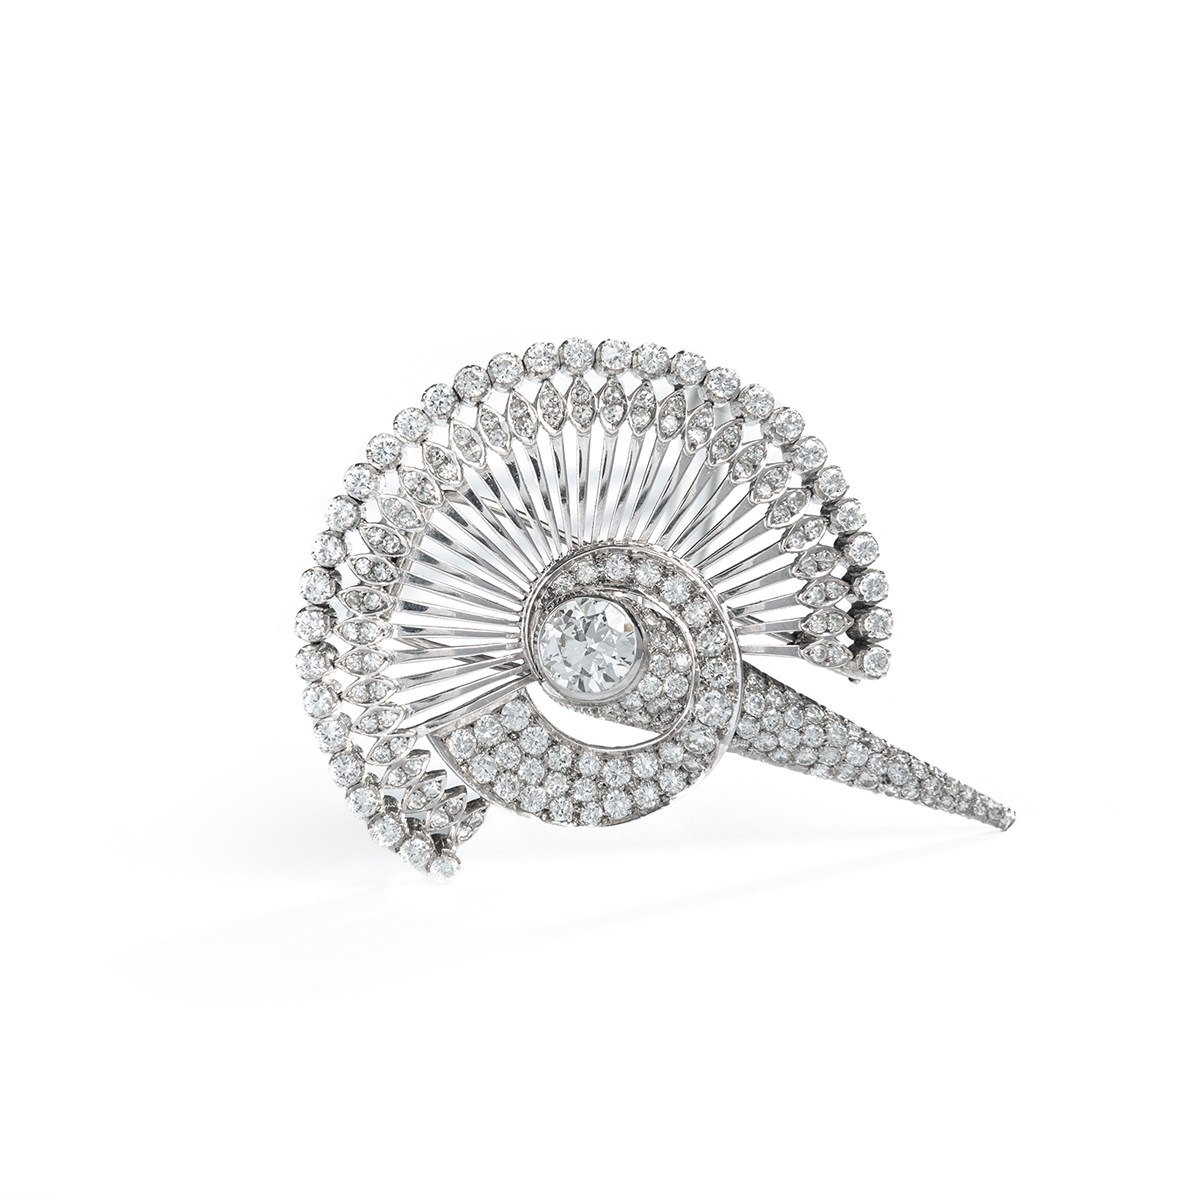 Retro Diamond and Platinum Clip Brooch. Set with a central brilliant-cut diamond, weighing approximately 2.0-2.5 carats, G-H color, VVS-VS clarity. Pavé-set with brilliant-cut and single-cut diamonds, weighing a total of approximately 5-7 carats, H-I color, VS clarity. With a double pin in the back and security cap. Maker’s mark: V S Circa 1940. Total Length: 6.8 cm / 2.7 inches Gross weight: 34.68 grams.